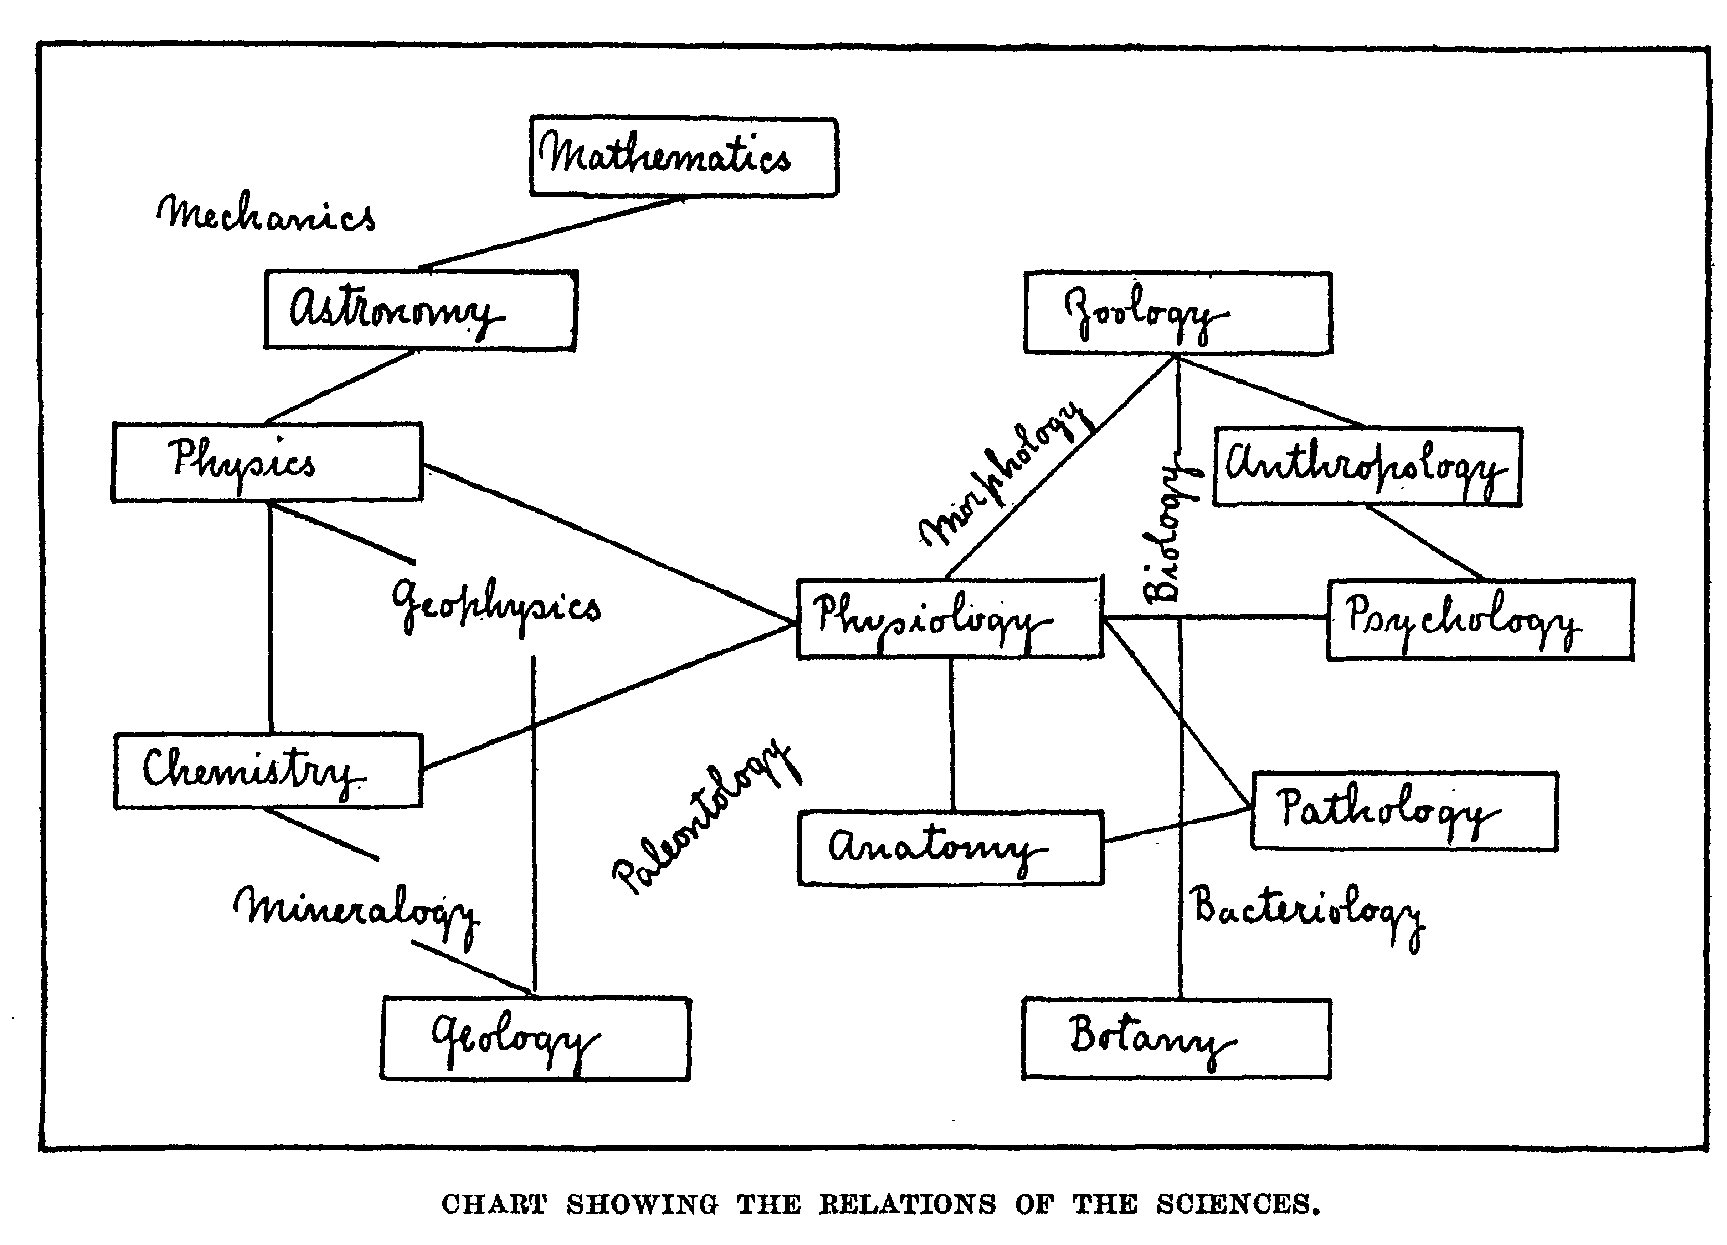 Chart showing the relations of the sciences